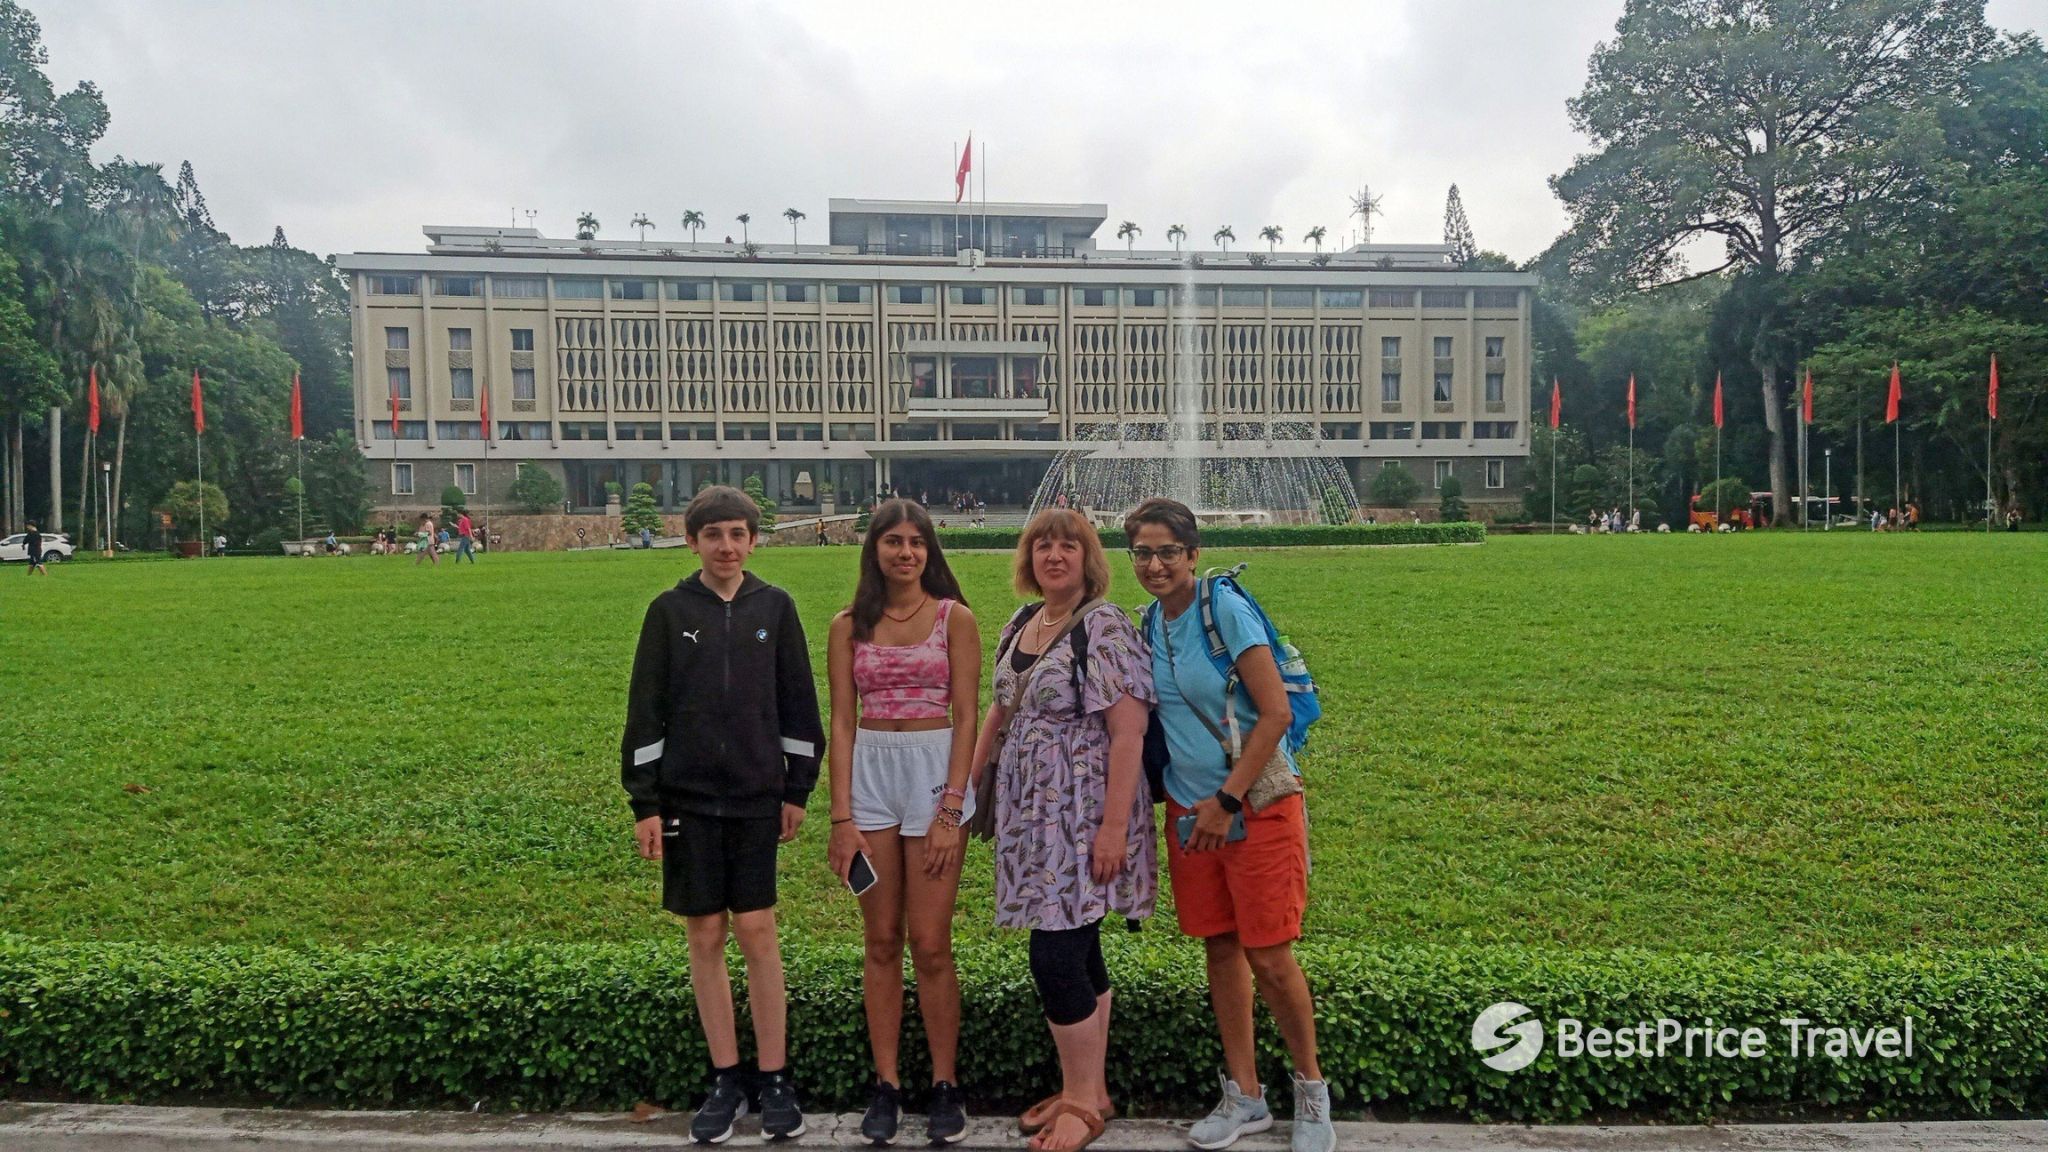 Day 10 Visit The Reunification Palace